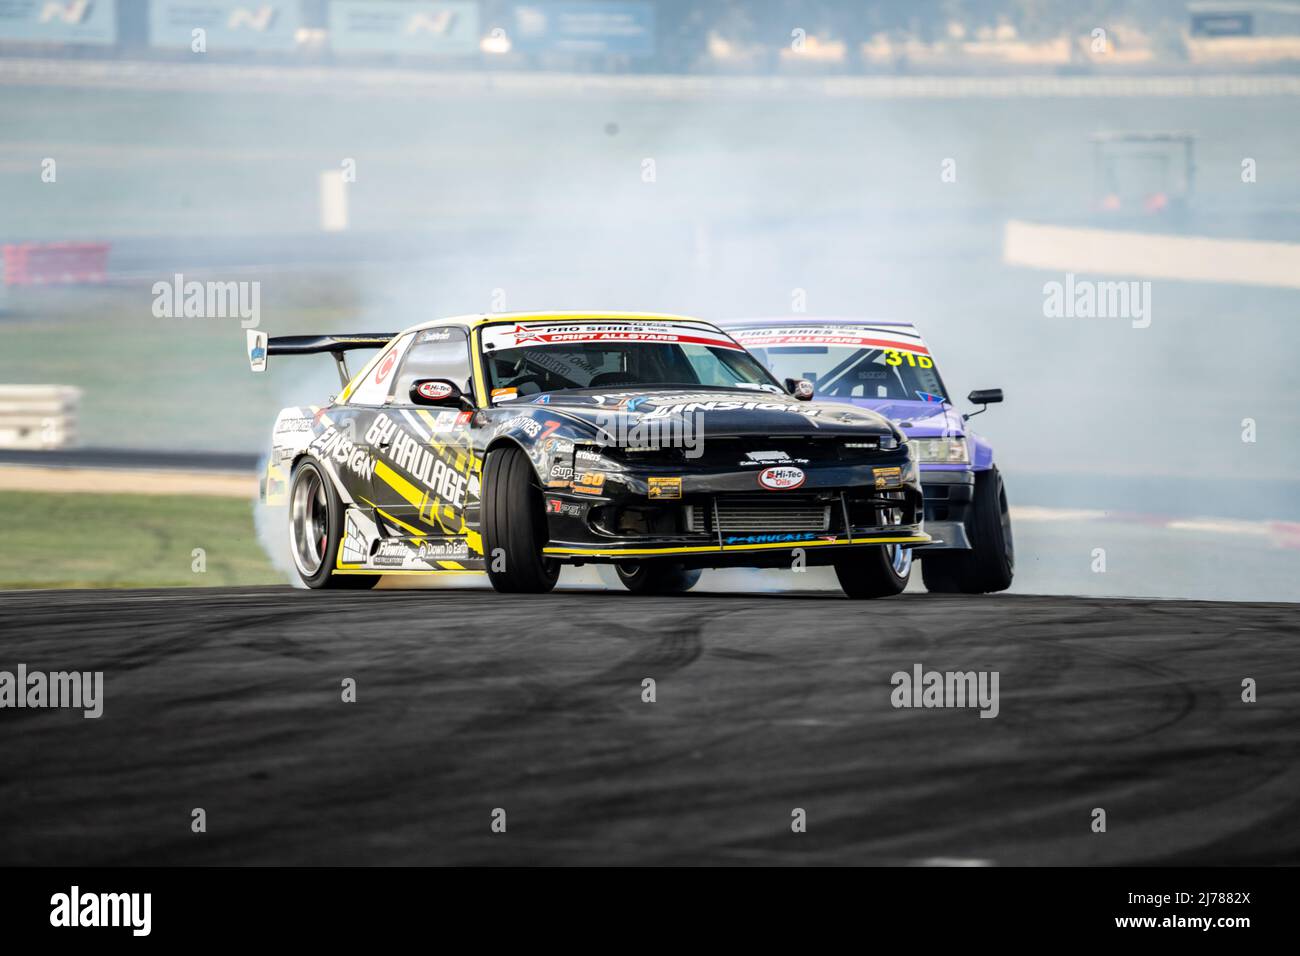 Benalla, Victoria, Australia. 7th May 2022. Dale Campaign #78 leading the run closely followed by Jason Ferron #31. Credit: James Forrester/Alamy Live News Stock Photo